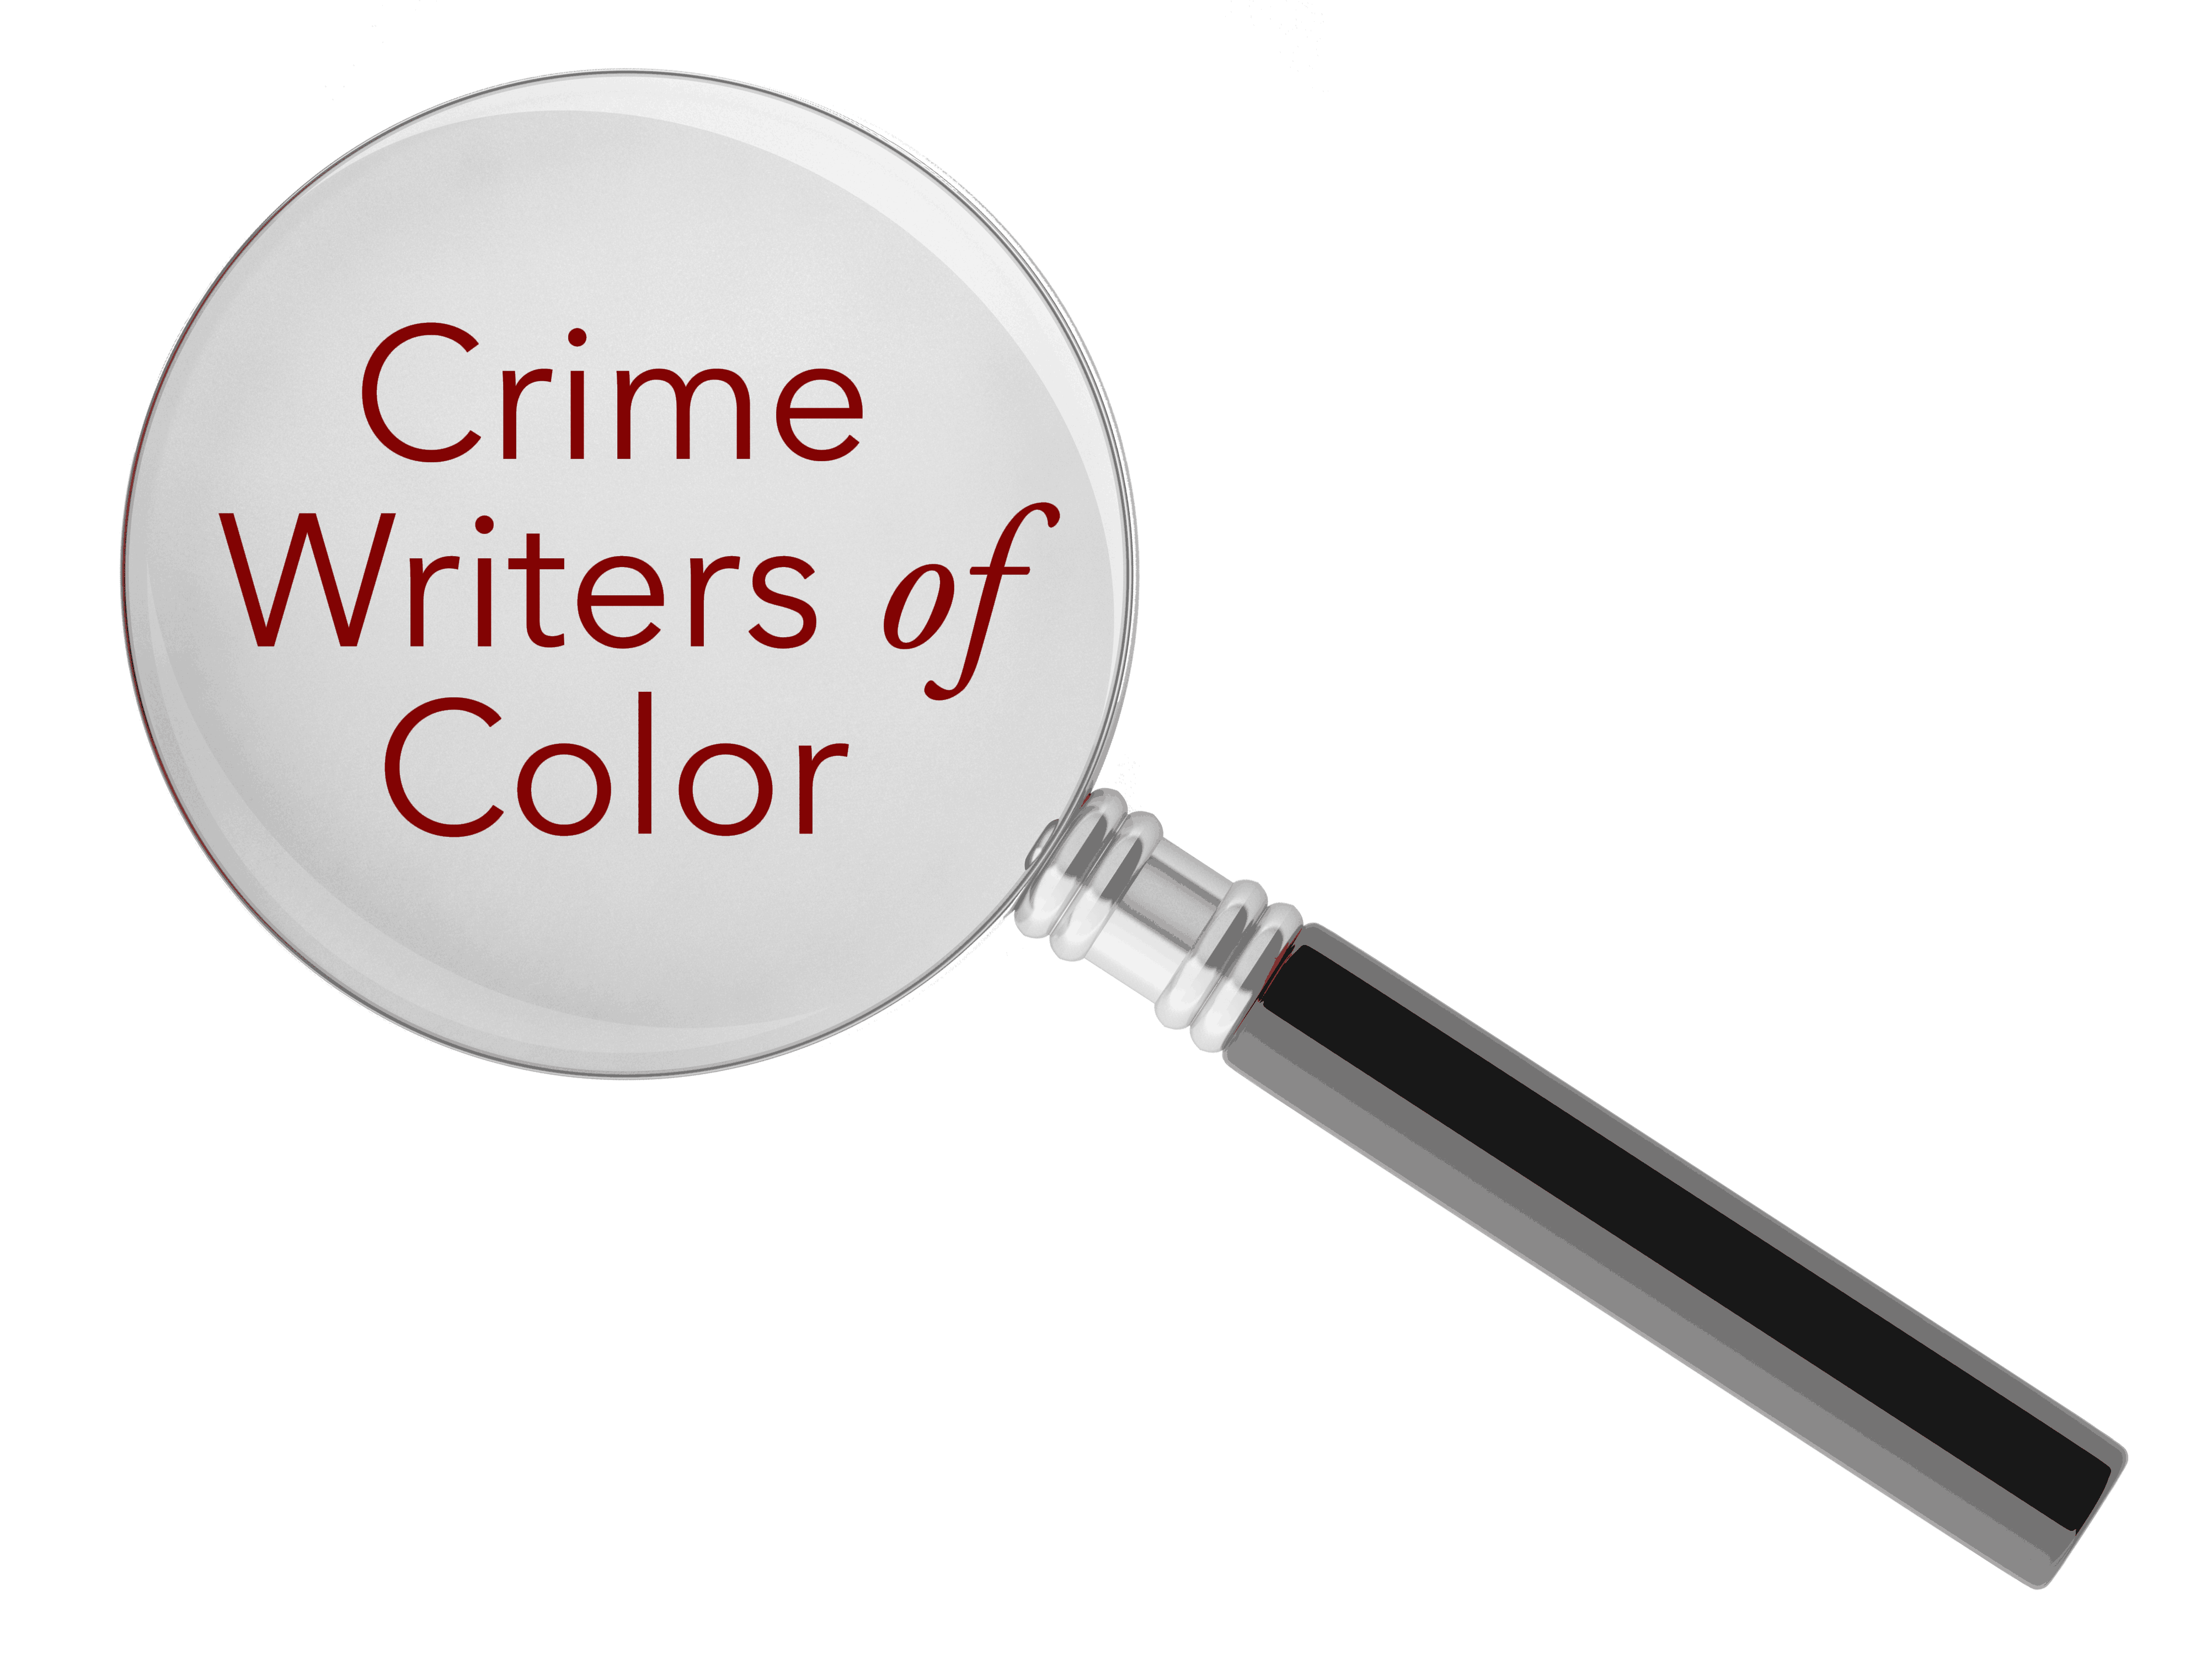 Crime Writers of Color